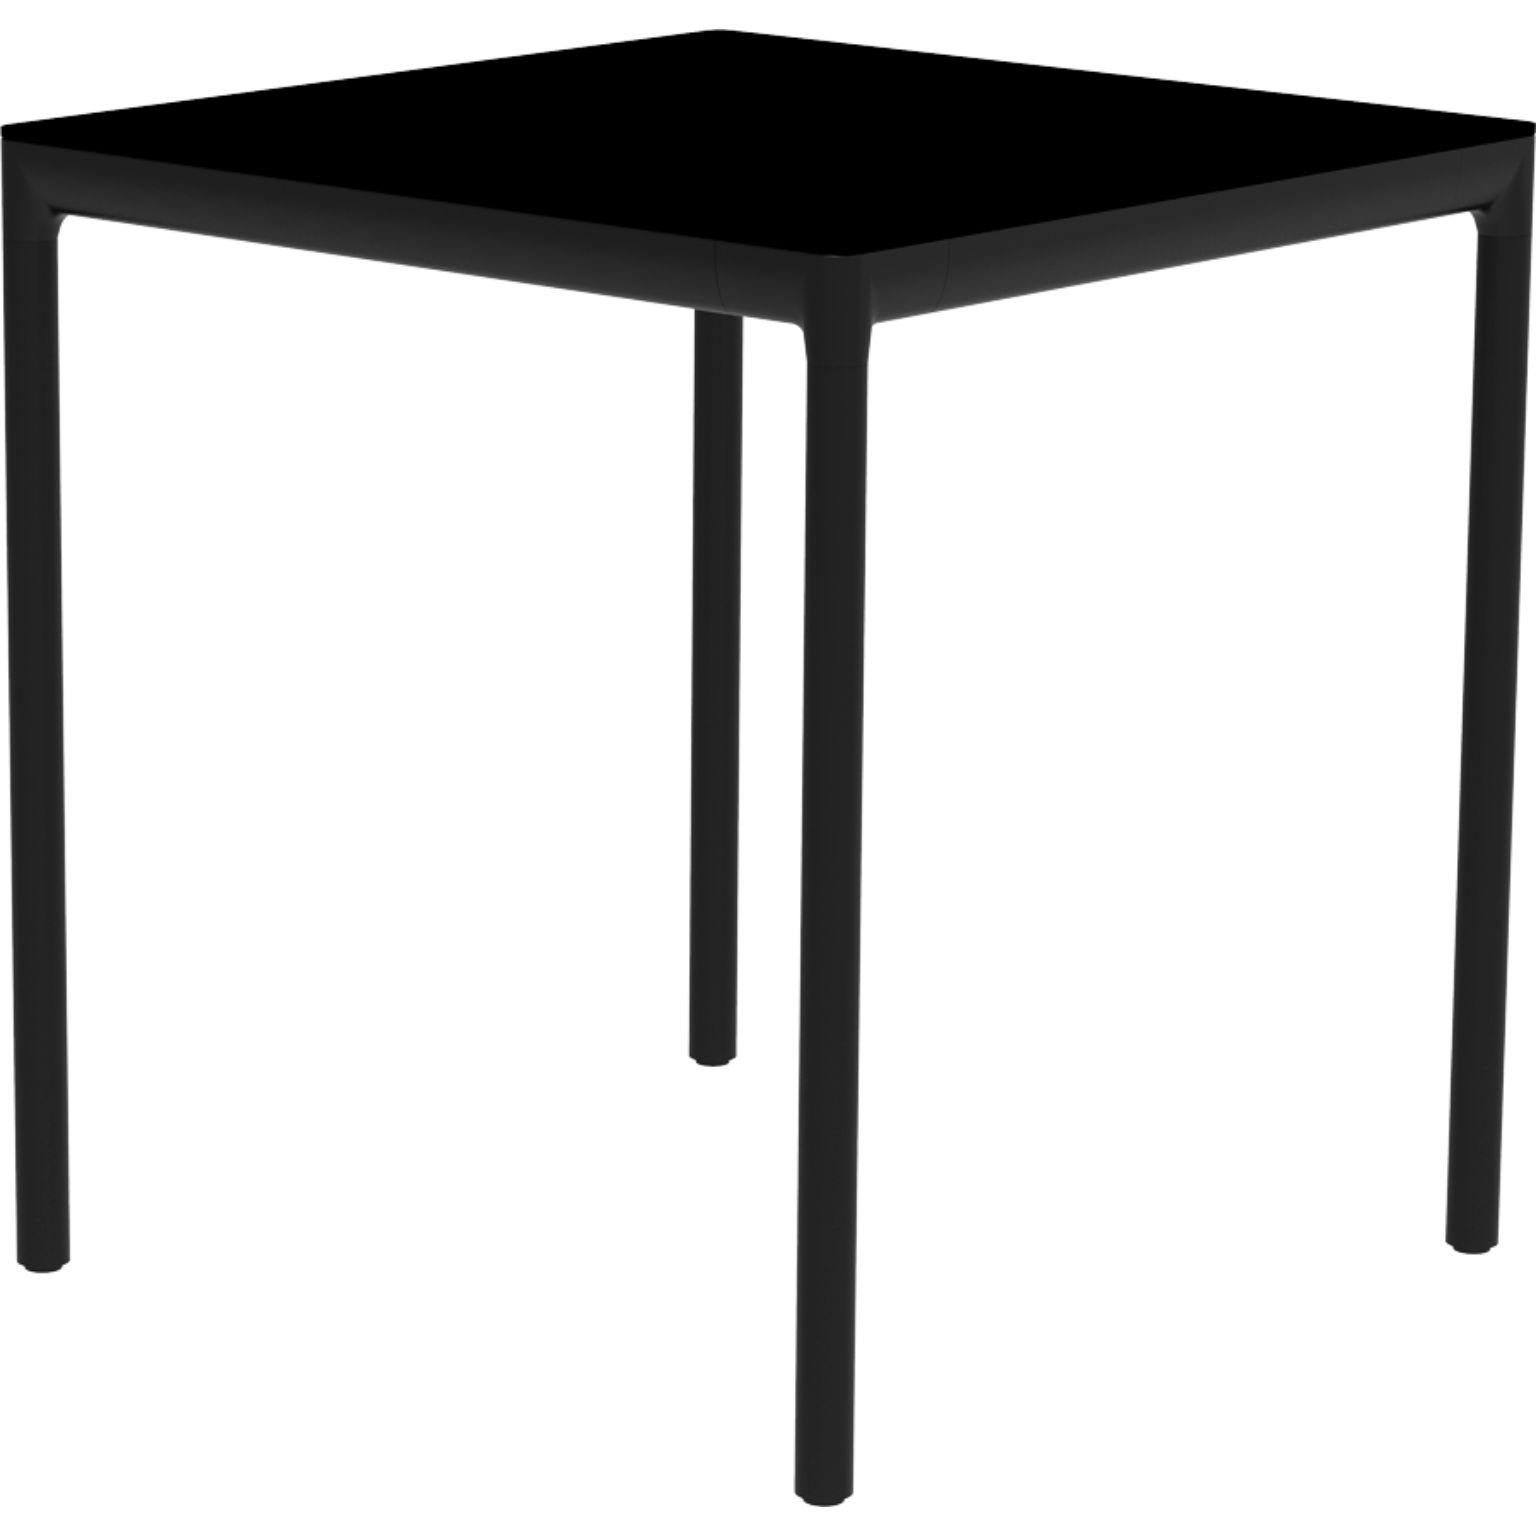 Ribbons black 70 side table by MOWEE
Dimensions: D70 x W70 x H75 cm.
Material: Aluminum, HPL top.
Weight: 12 kg.
Also available in different colors and finishes. (HPL Black Edge or Neolith top).

An unmistakable collection for its beauty and